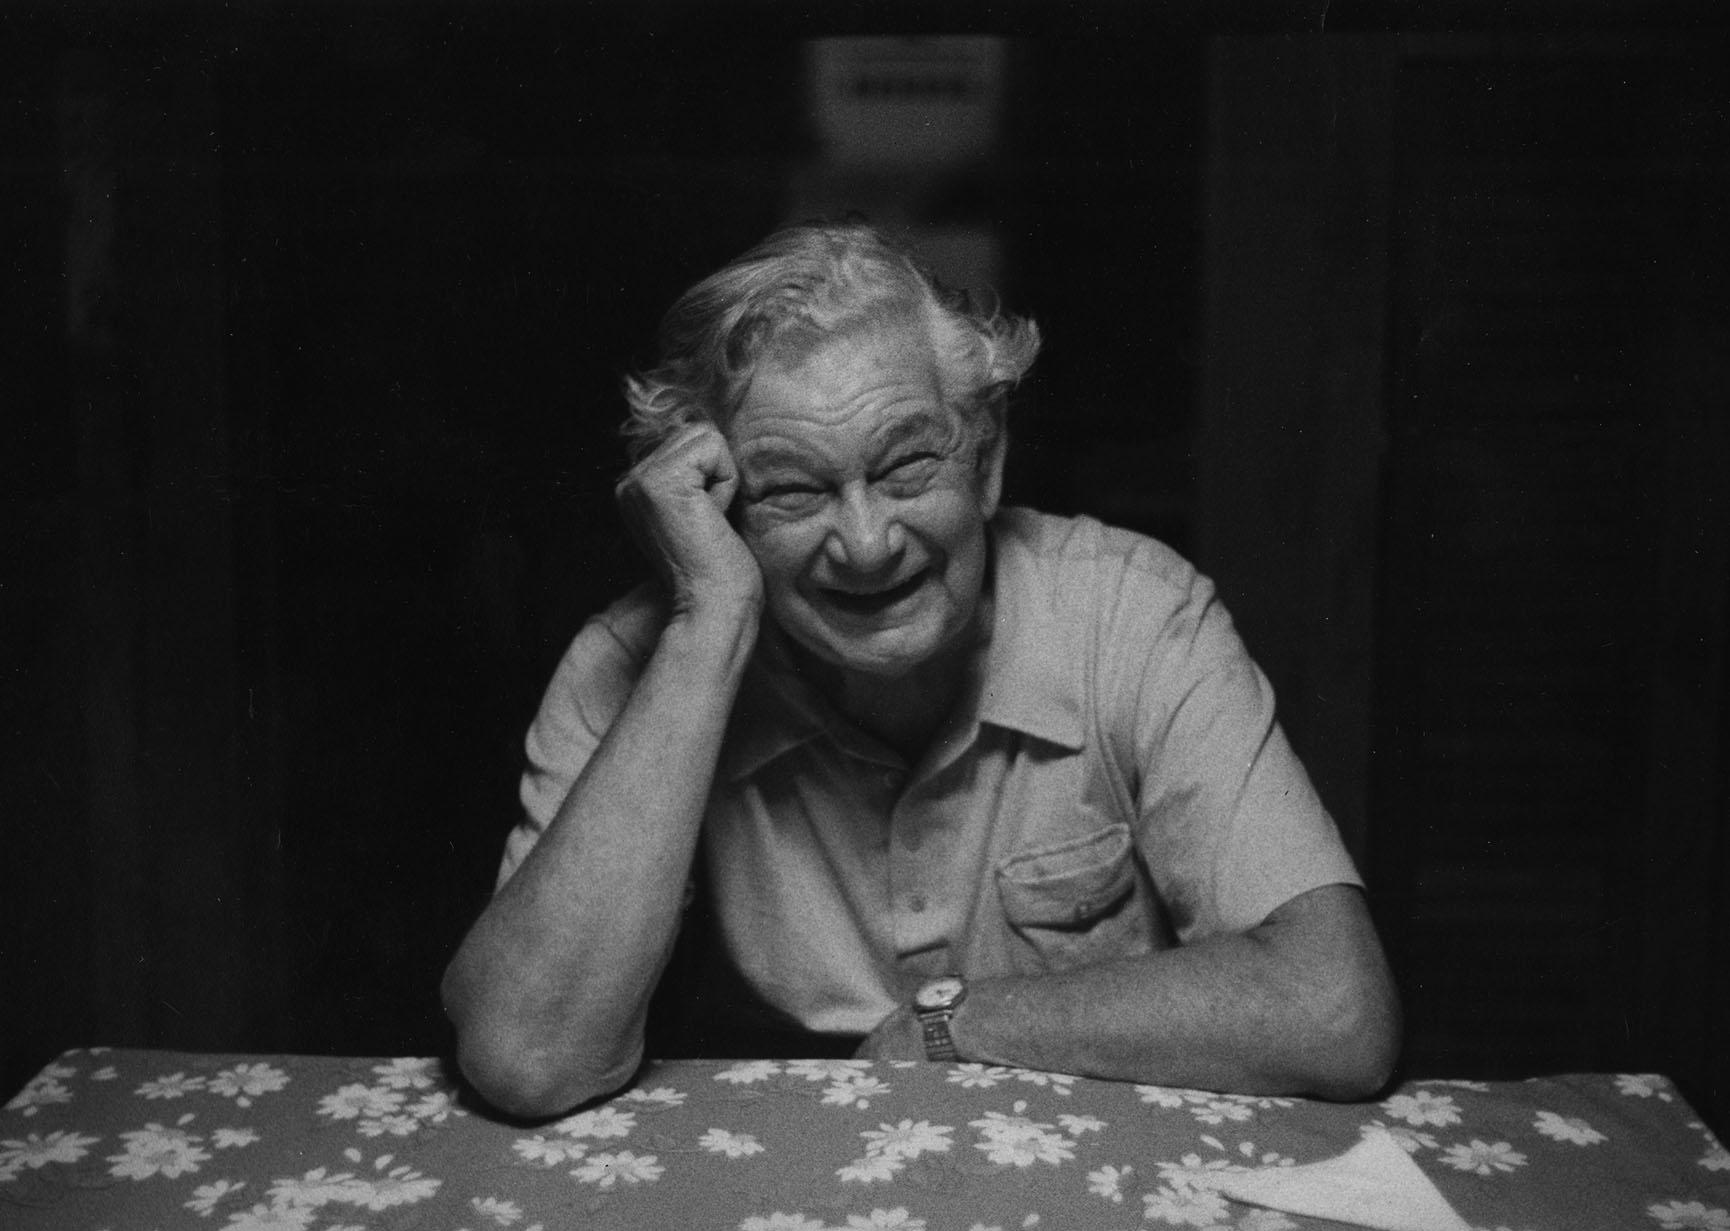 Noted lithographer Grant Arnold in a 1982 photo